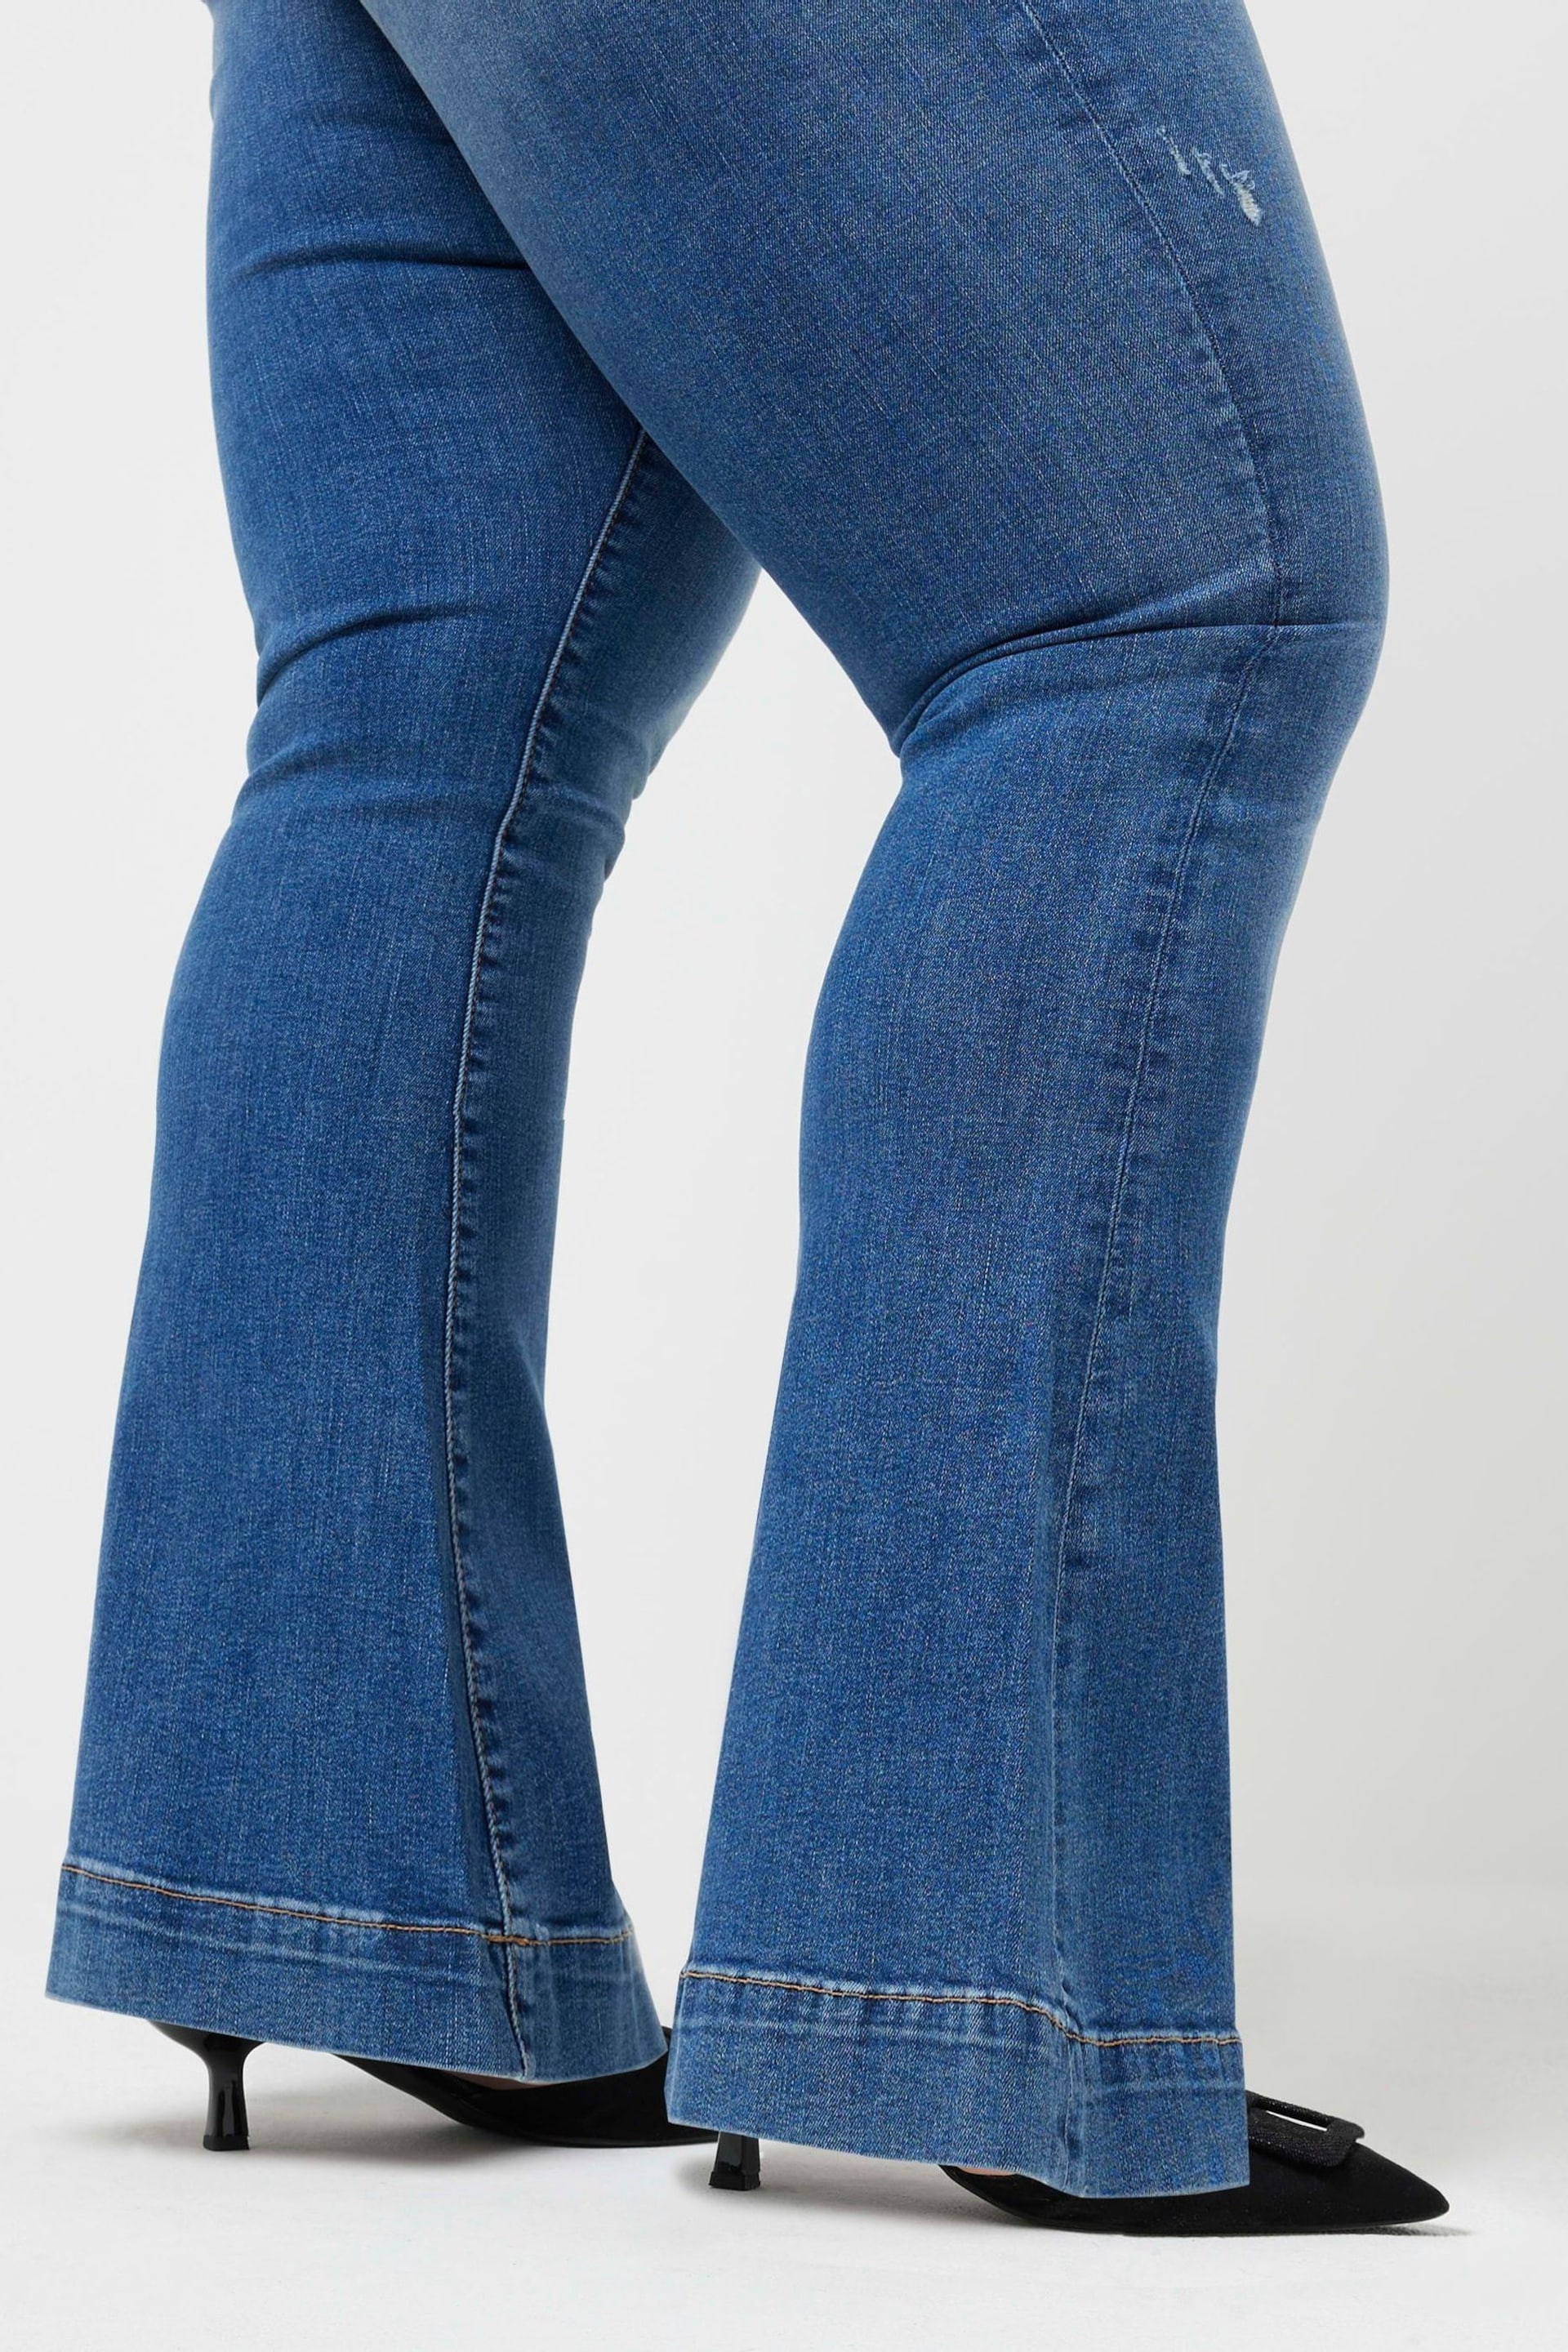 River Island Blue Curve High Rise Tummy Hold Flared Jeans - Image 4 of 5